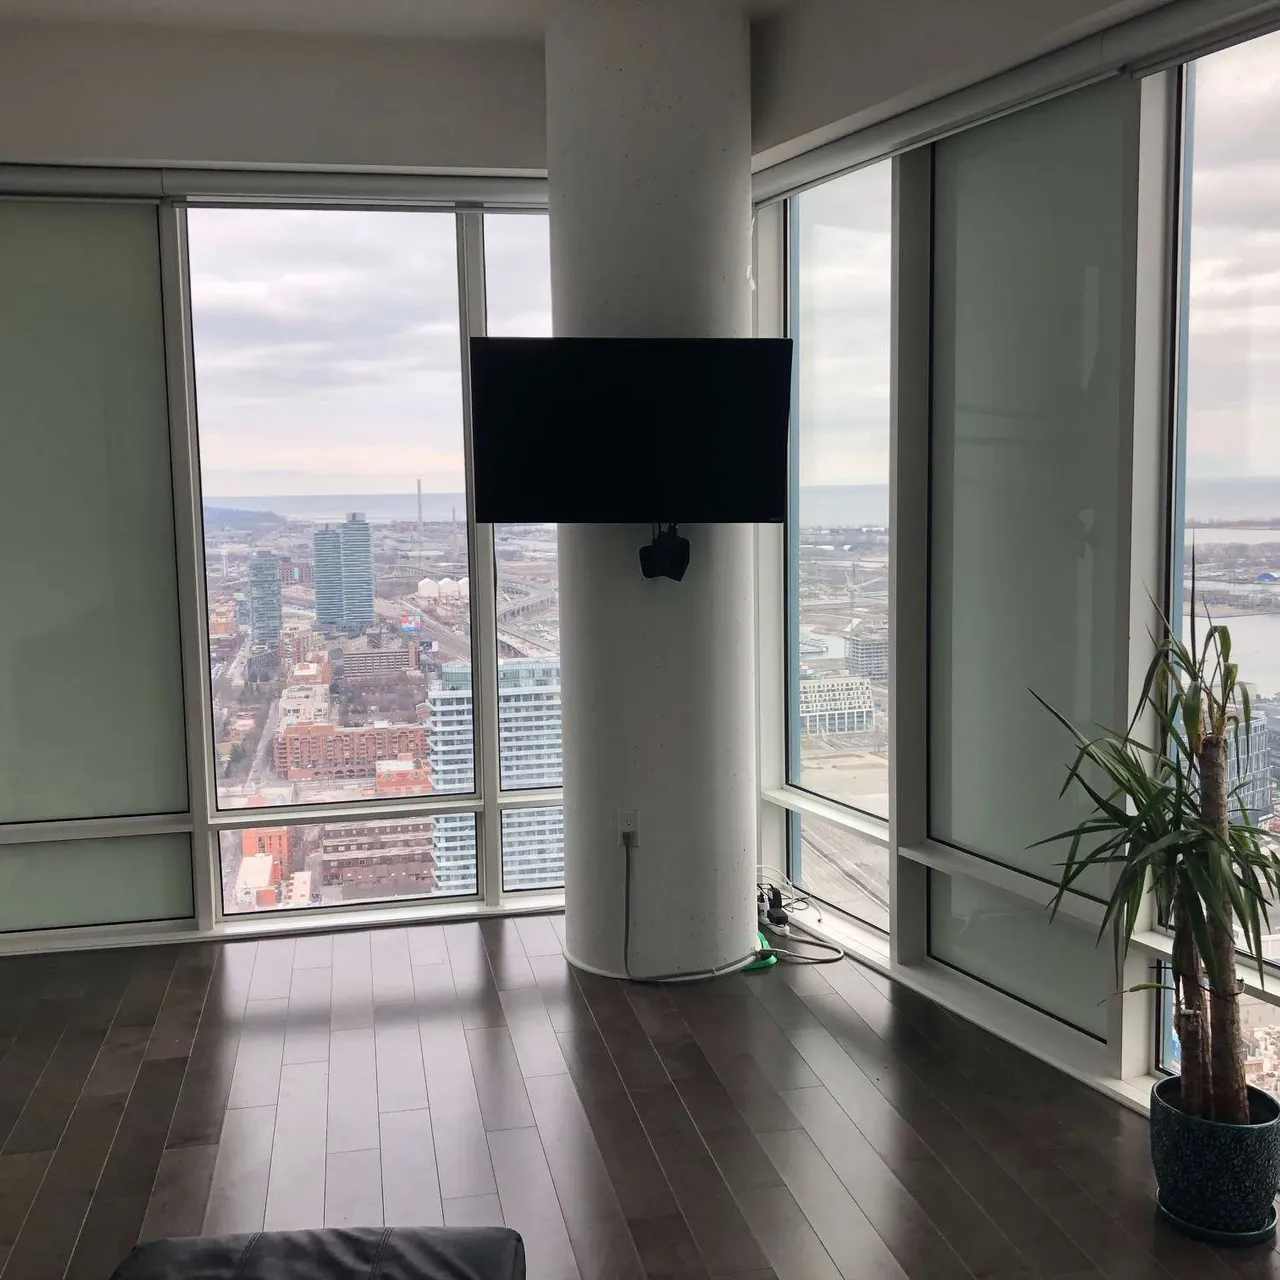 Financial District Condo Room for Rent, $1600/month photo 3